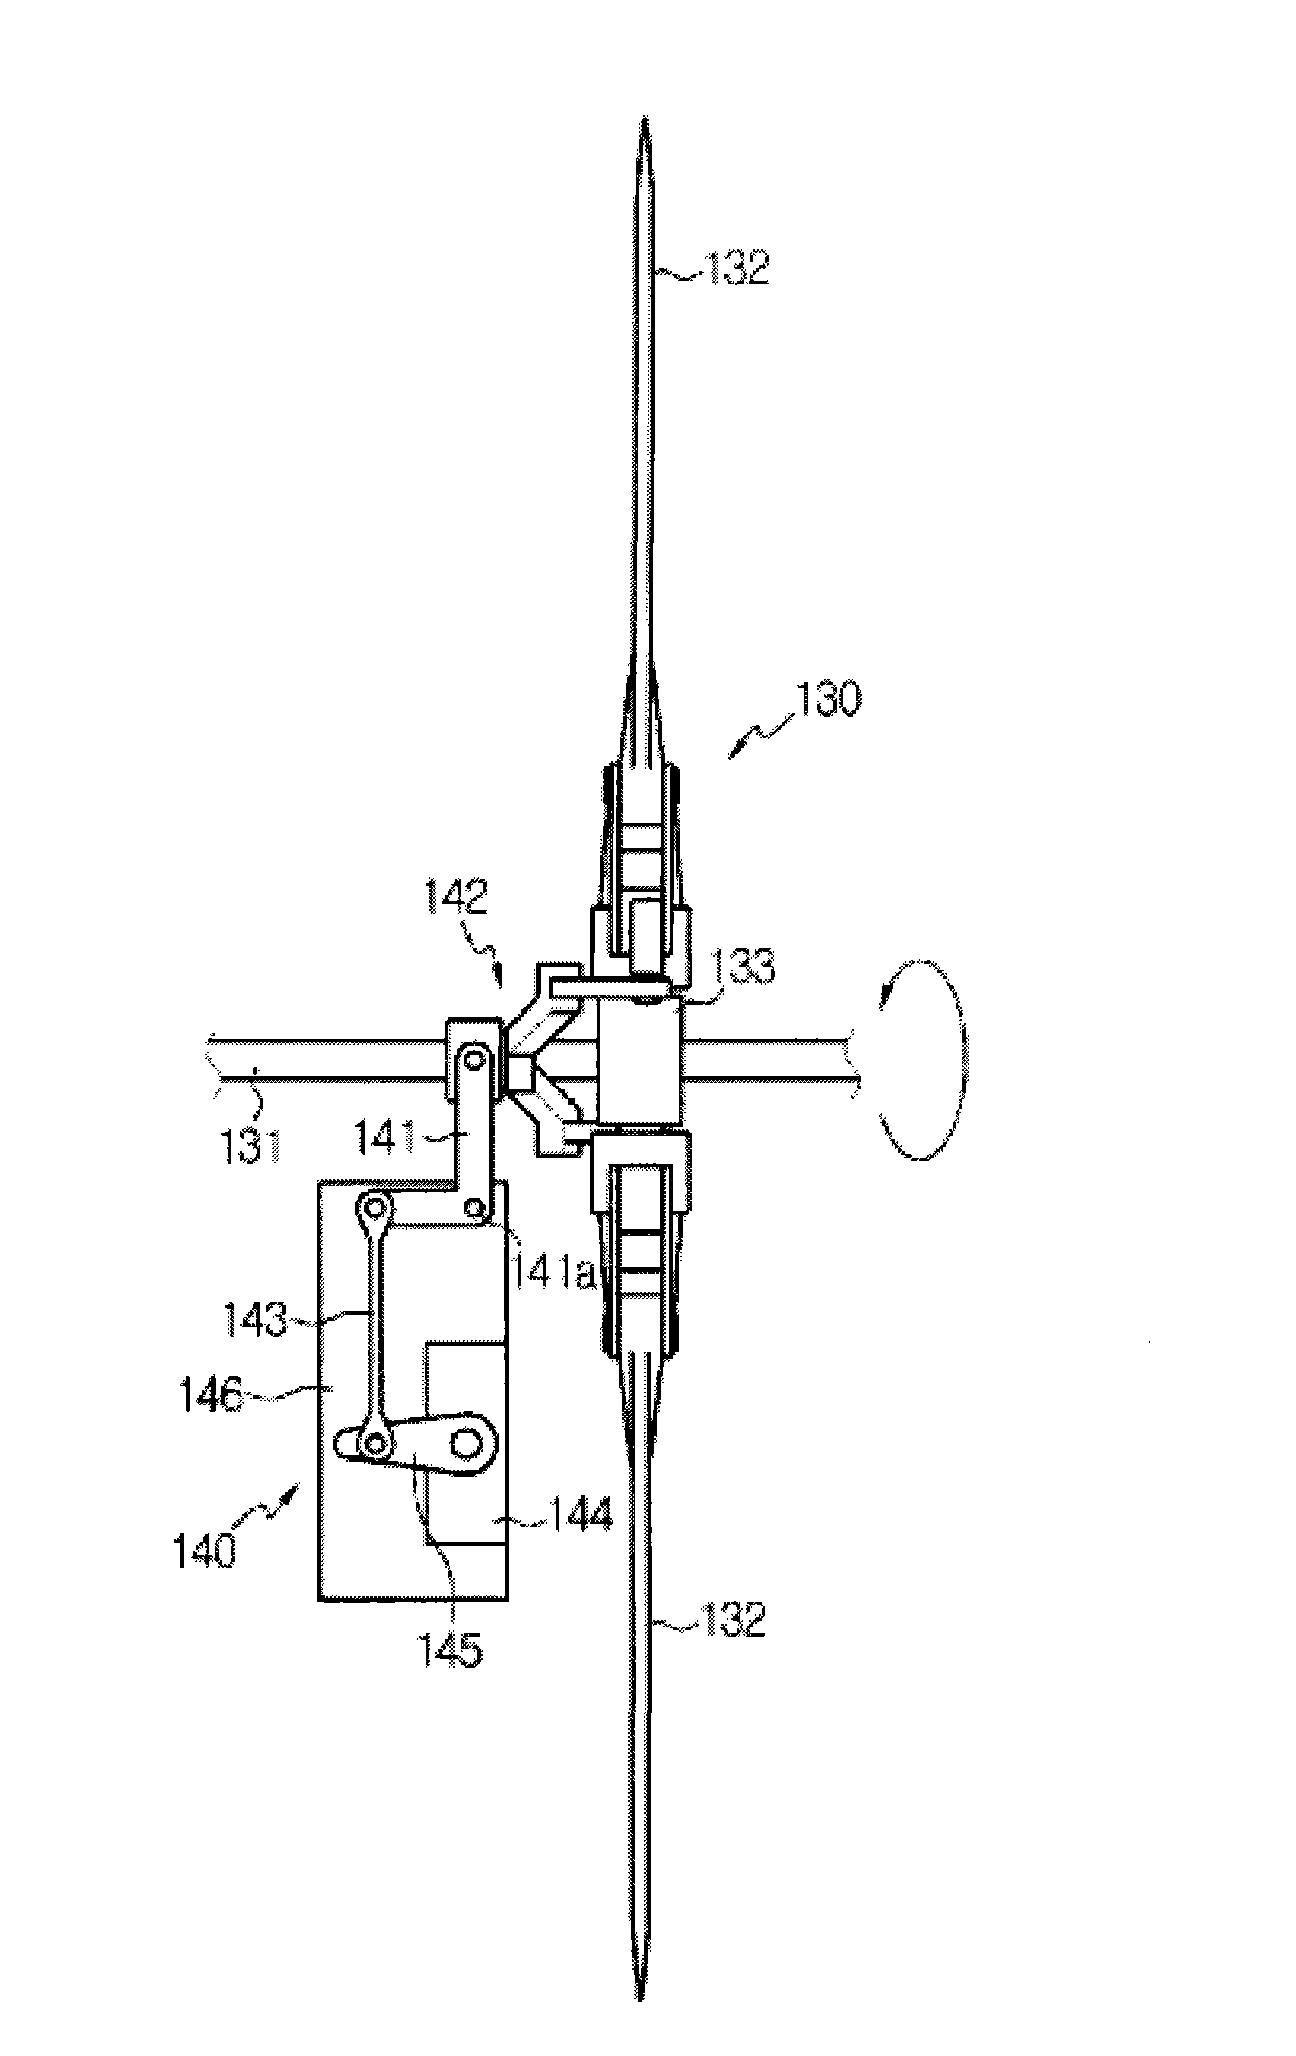 Apparatus for moving camera